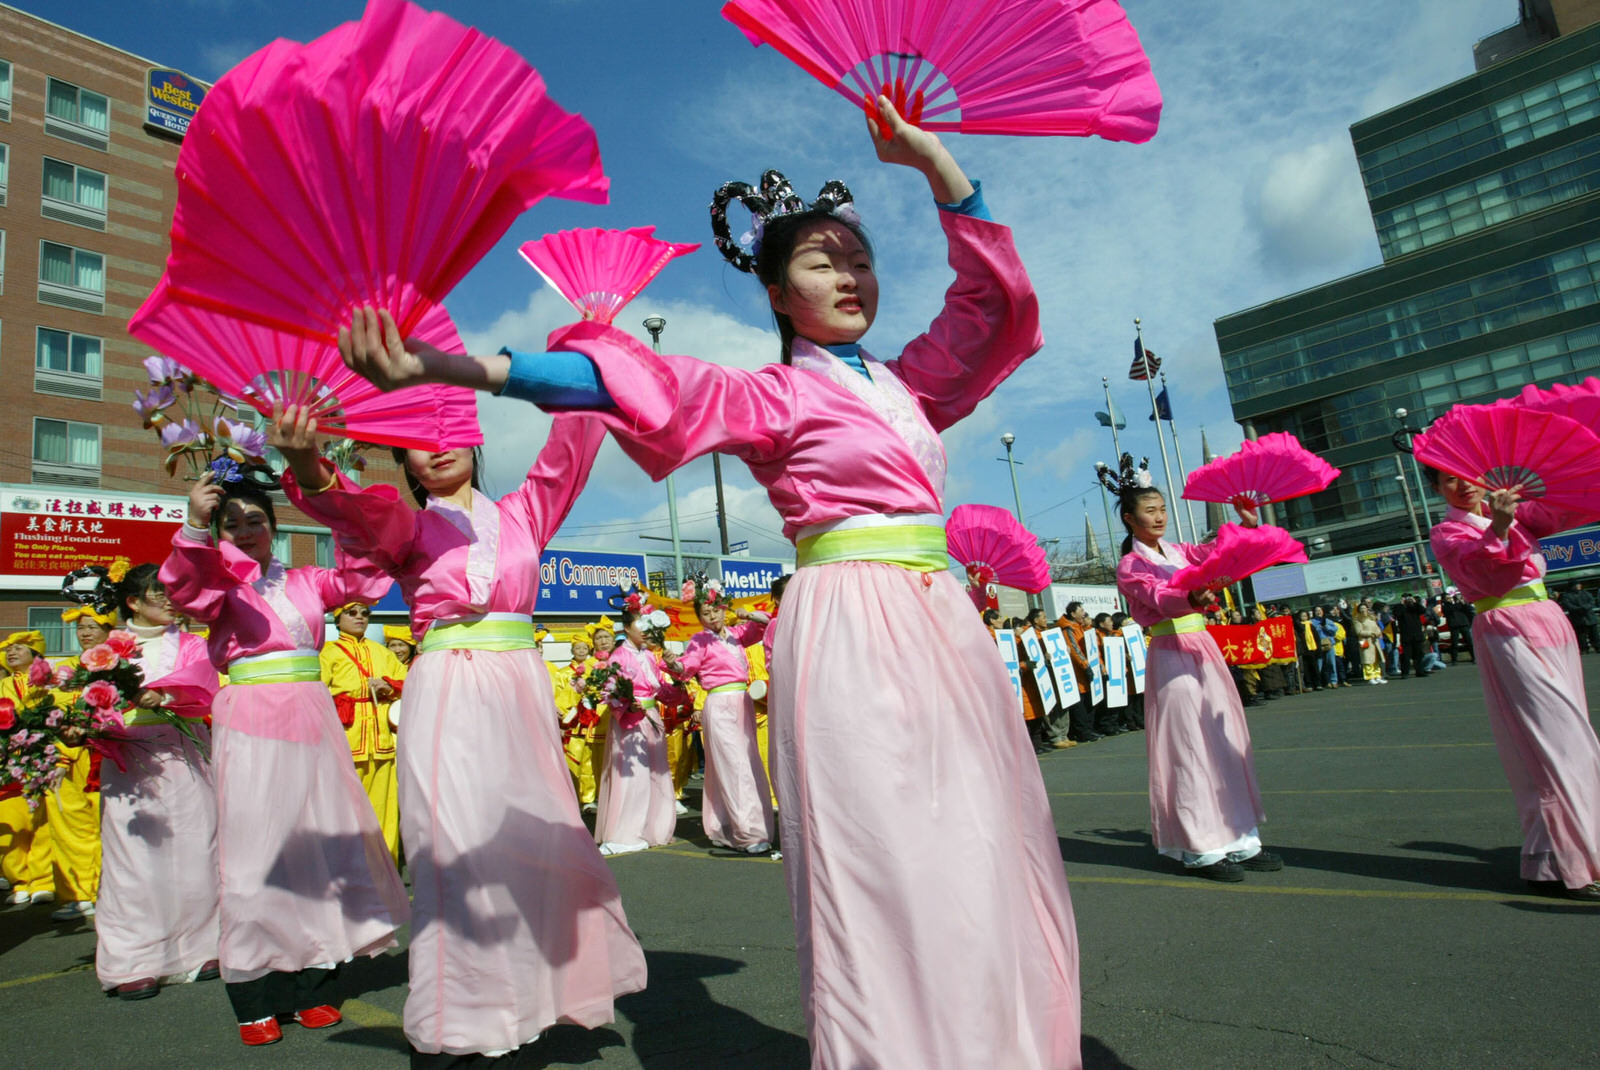 Korean dancers taking part in the Chinese New Year parade in Flushing, Queens